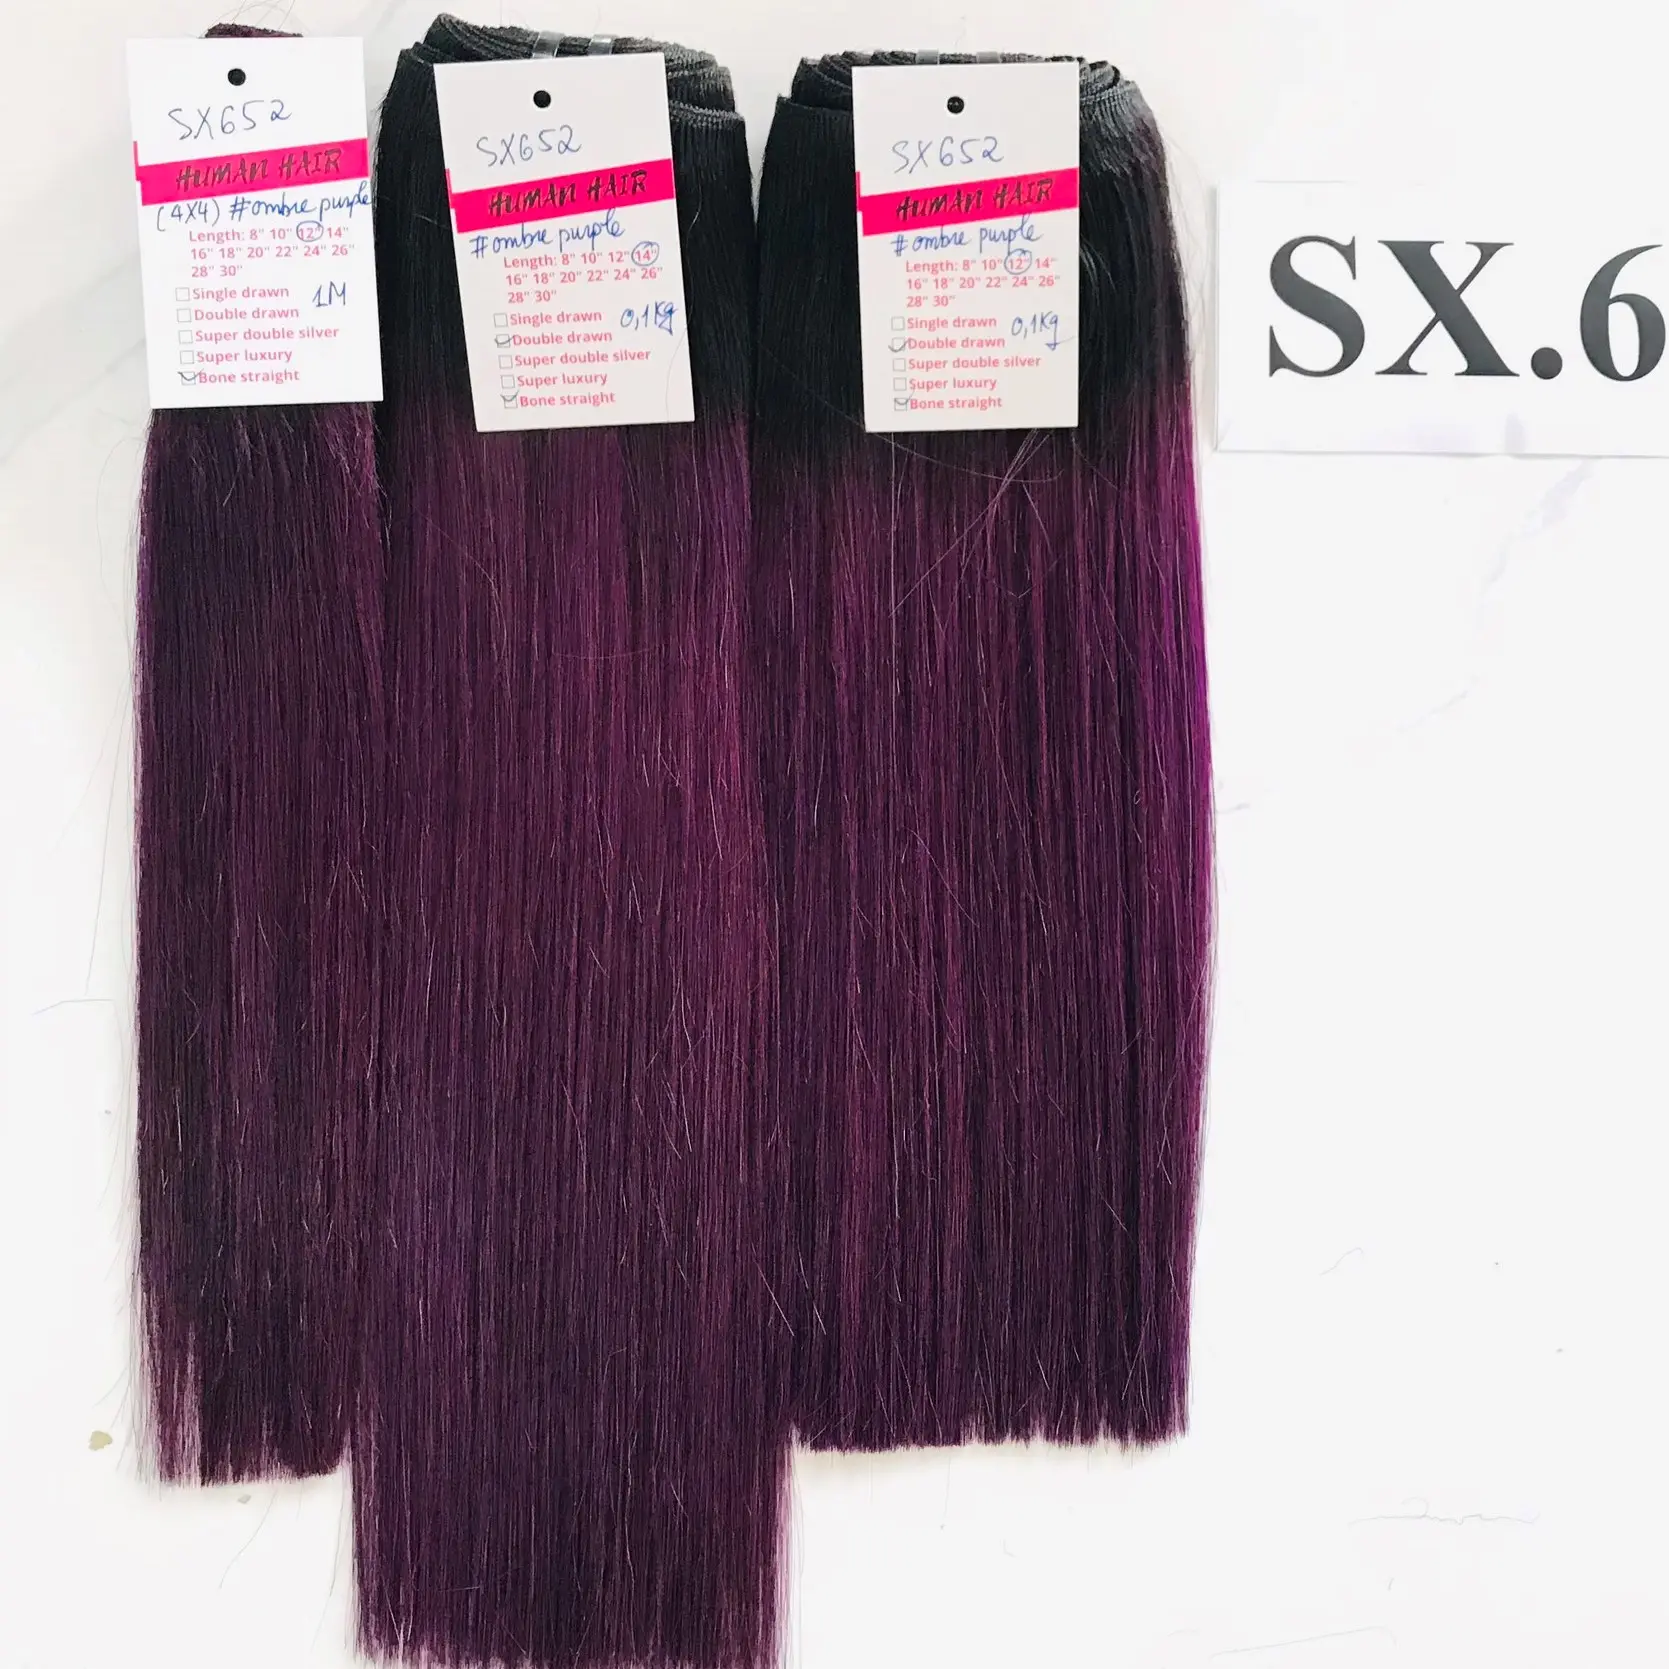 Carton Box For New Arrival Most Popular Hair Styles Raw Ombre Bone Straight Hair Vietnam Hair Extension Factory